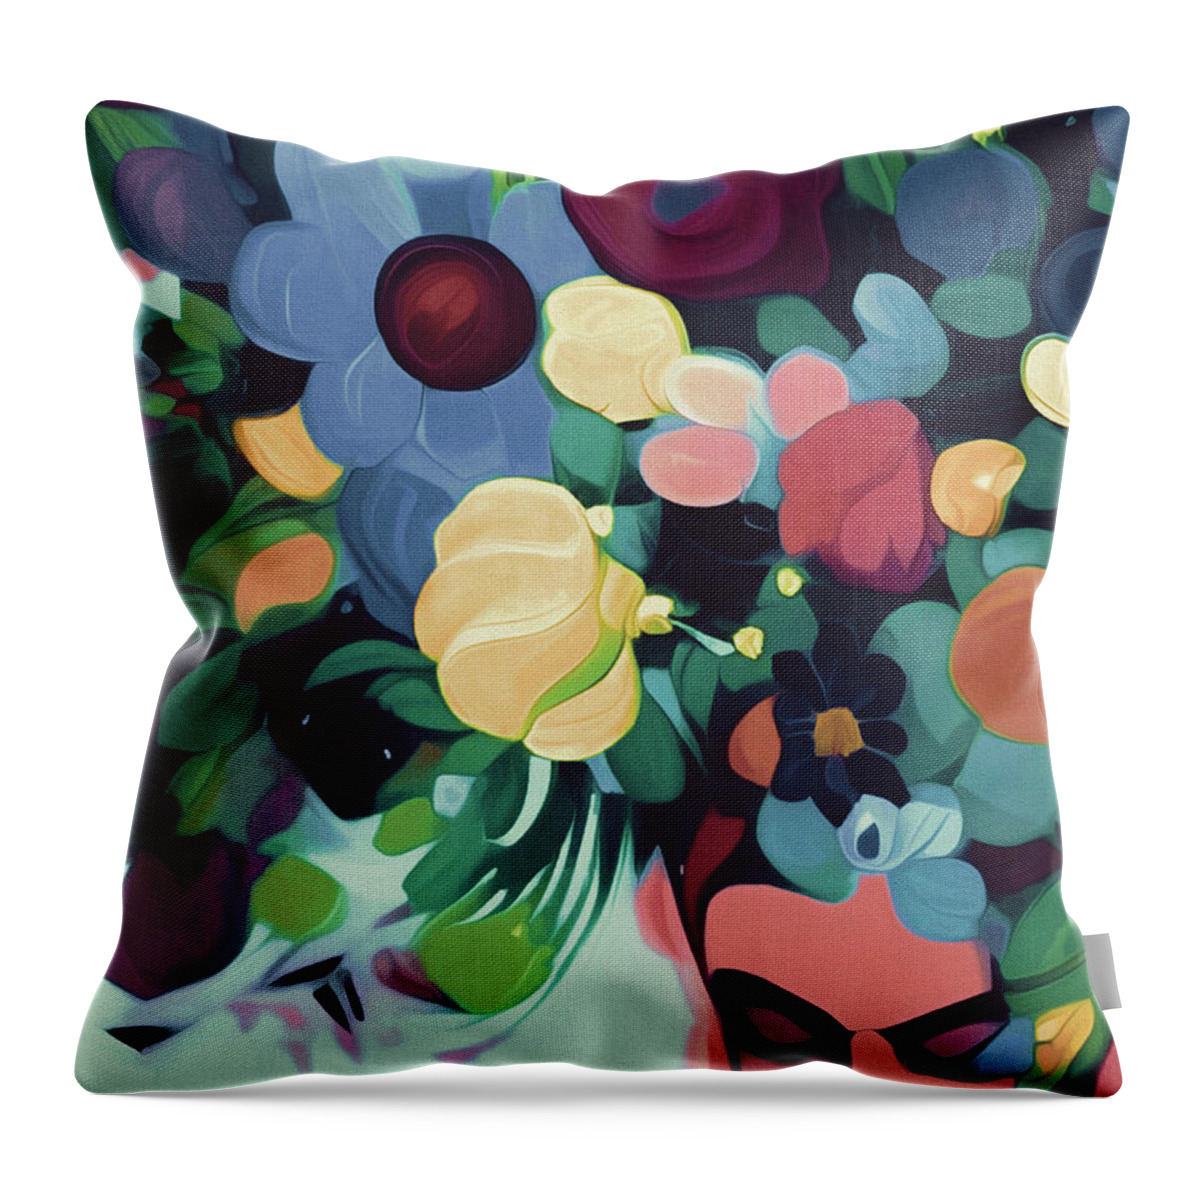  Throw Pillow featuring the digital art Flowers In Her Hair by Michelle Hoffmann